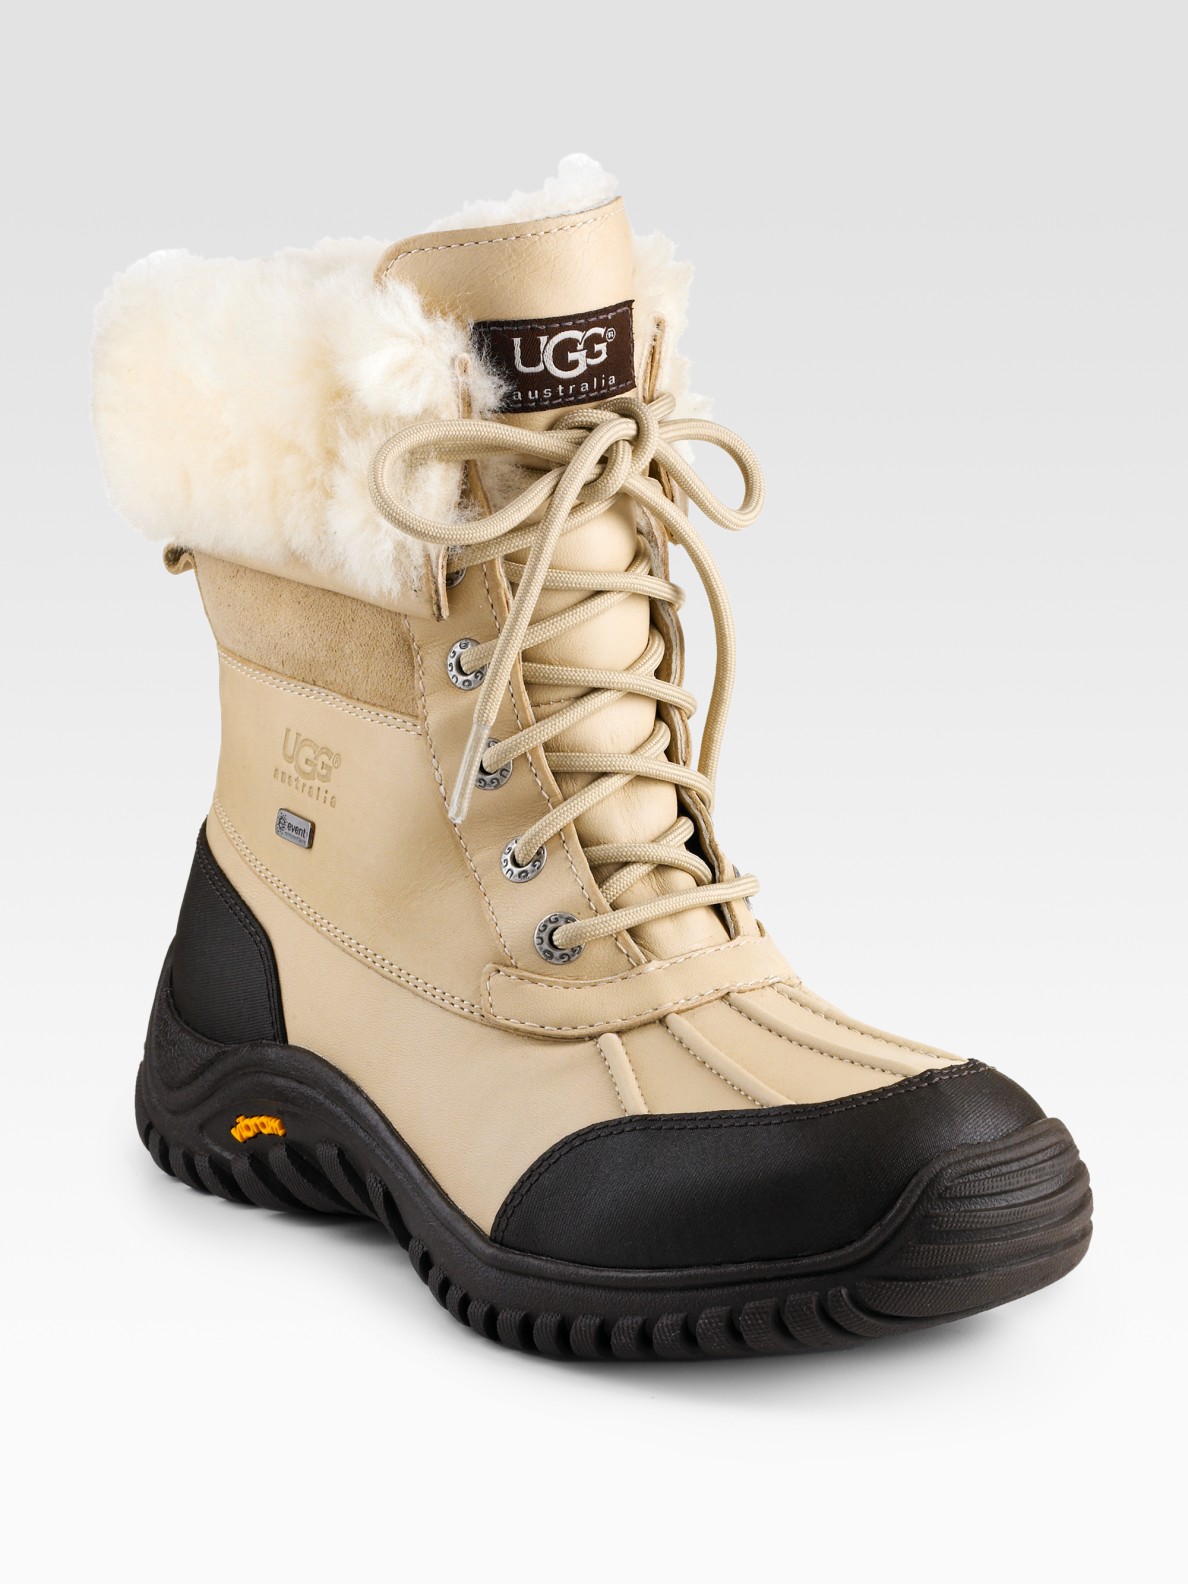 Ugg Adirondack Ii Lace-up Shearling-Lined Boots in Beige (BLACKGREY) | Lyst